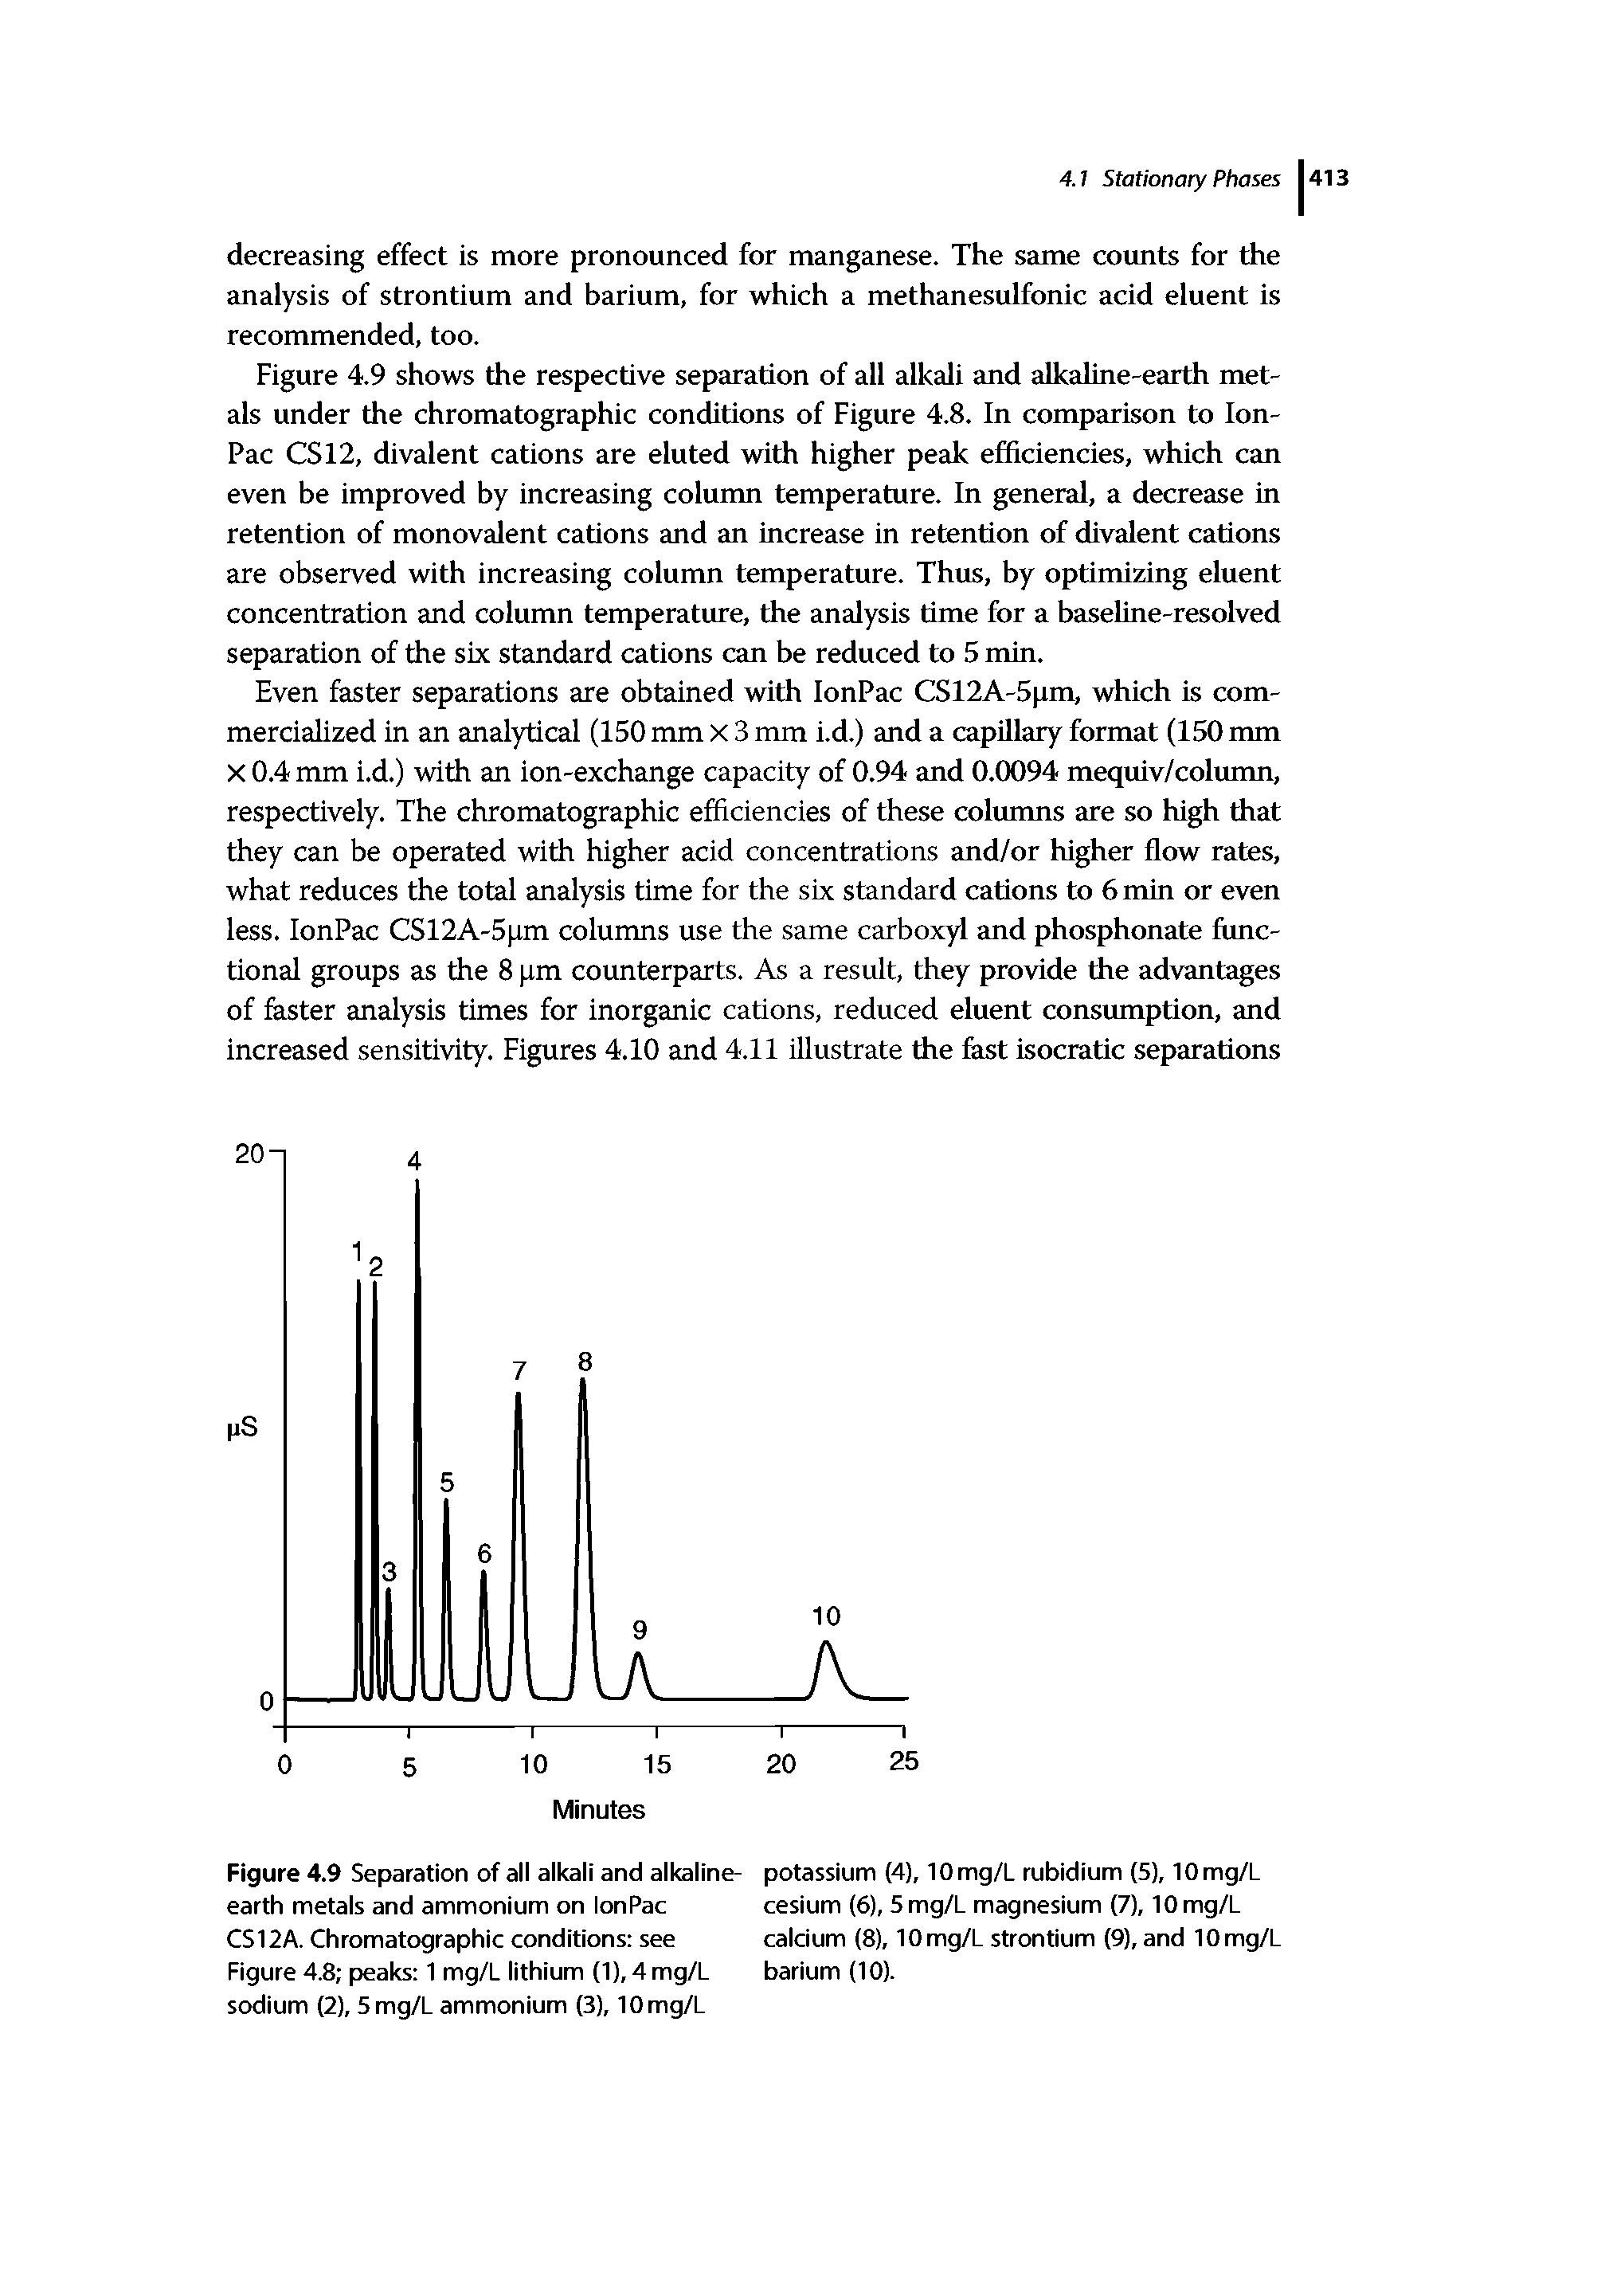 Figure 4.9 shows the respective separation of all alkali and alkaline-earth metals under the chromatographic conditions of Figure 4.8. In comparison to lon-Pac CS12, divalent cations are eluted with higher peak efficiencies, which can even be improved by increasing column temperature. In general, a decrease in retention of monovalent cations and an increase in retention of divalent cations are observed with increasing column temperature. Thus, by optimizing eluent concentration and column temperature, the analysis time for a baseline-resolved separation of the six standard cations can be reduced to 5 min.